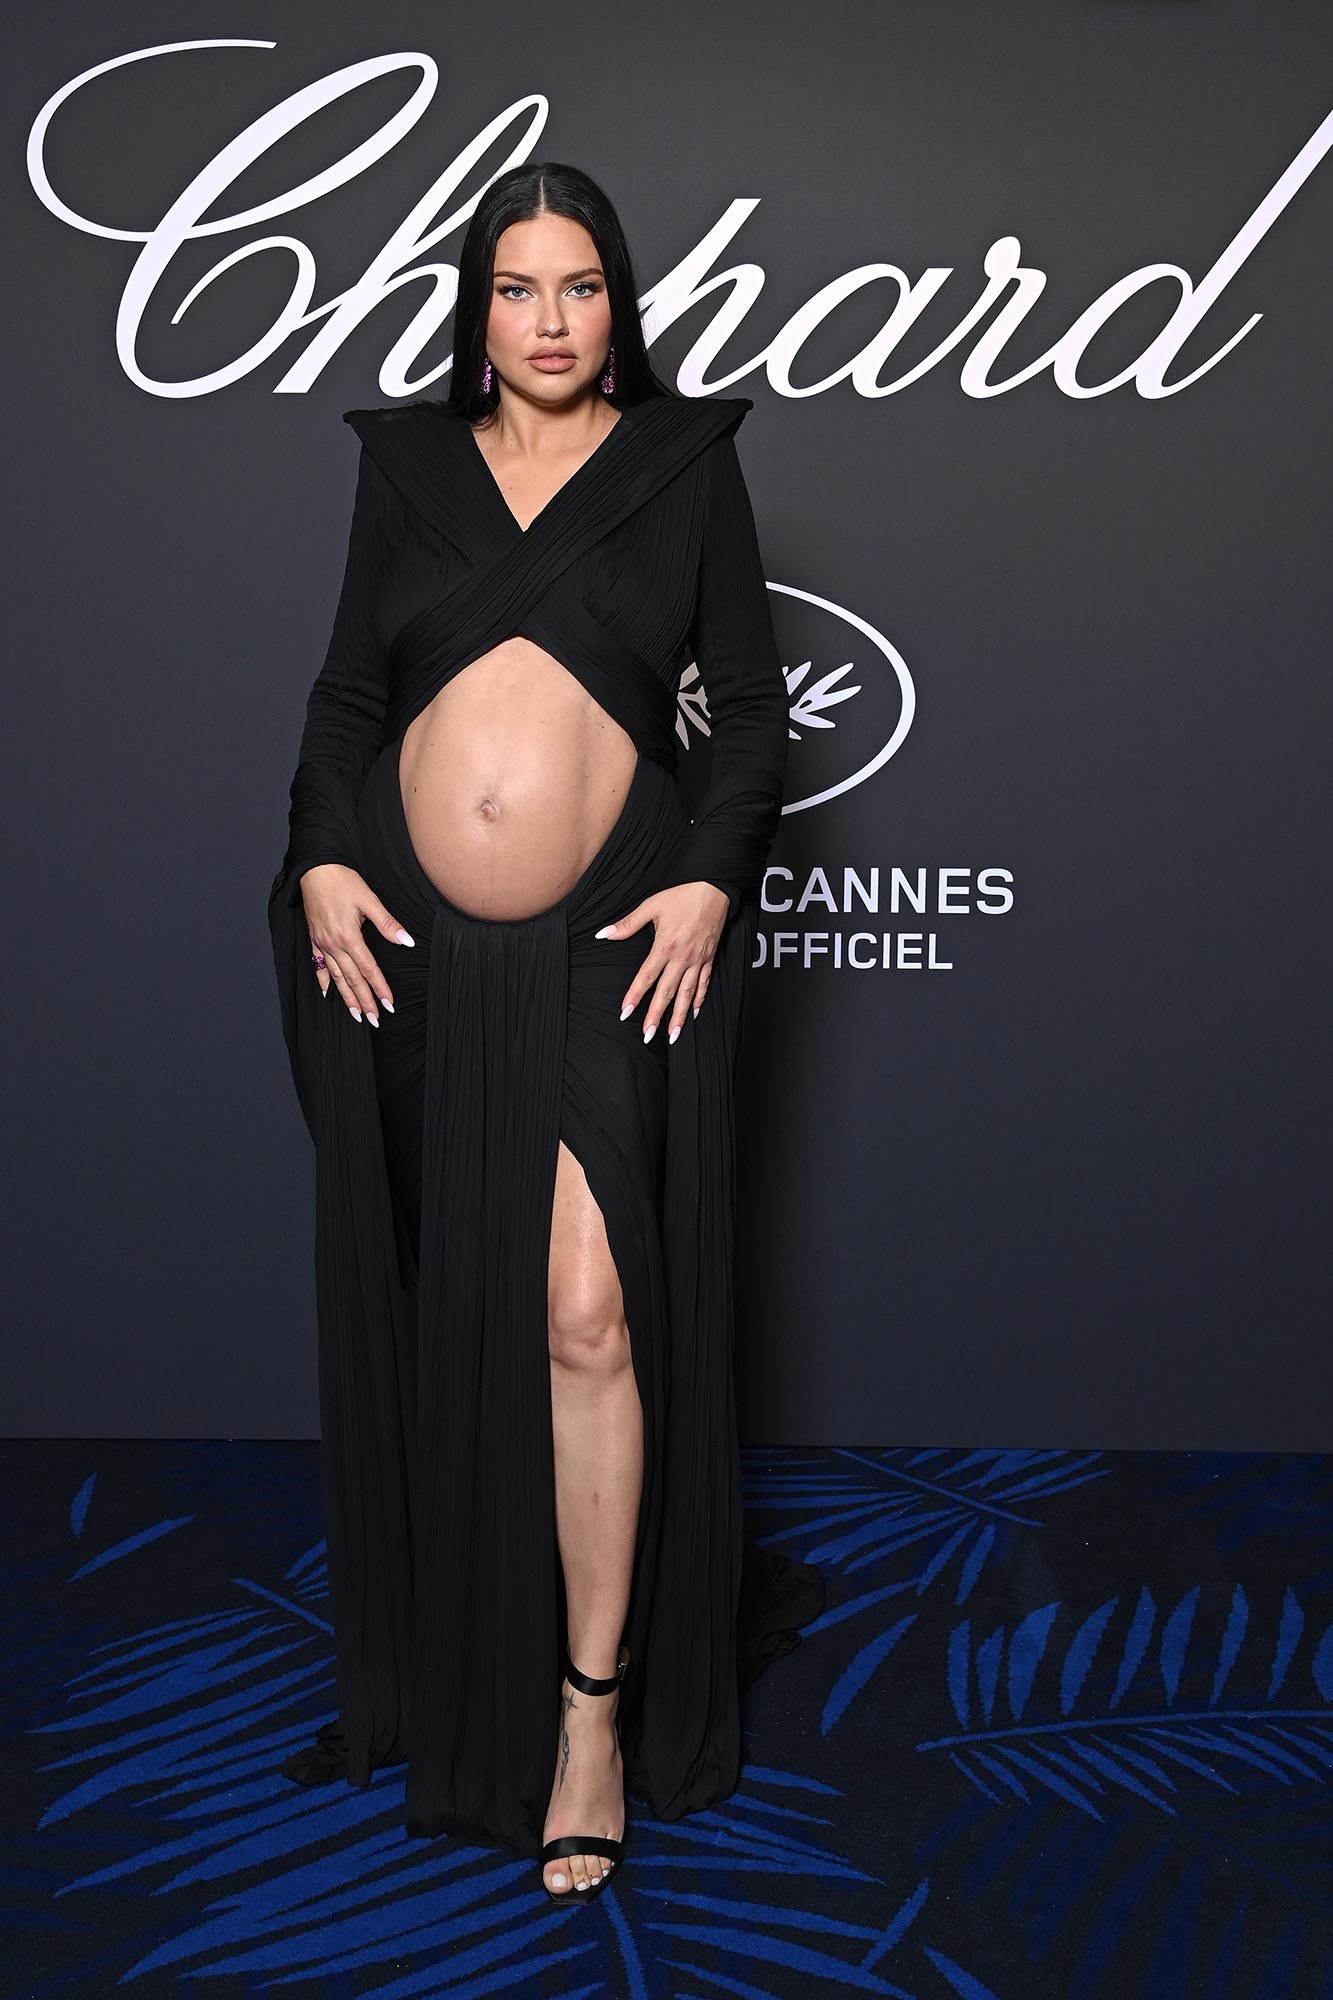 Stars Who Have Showed Off Their Baby Bump in Style